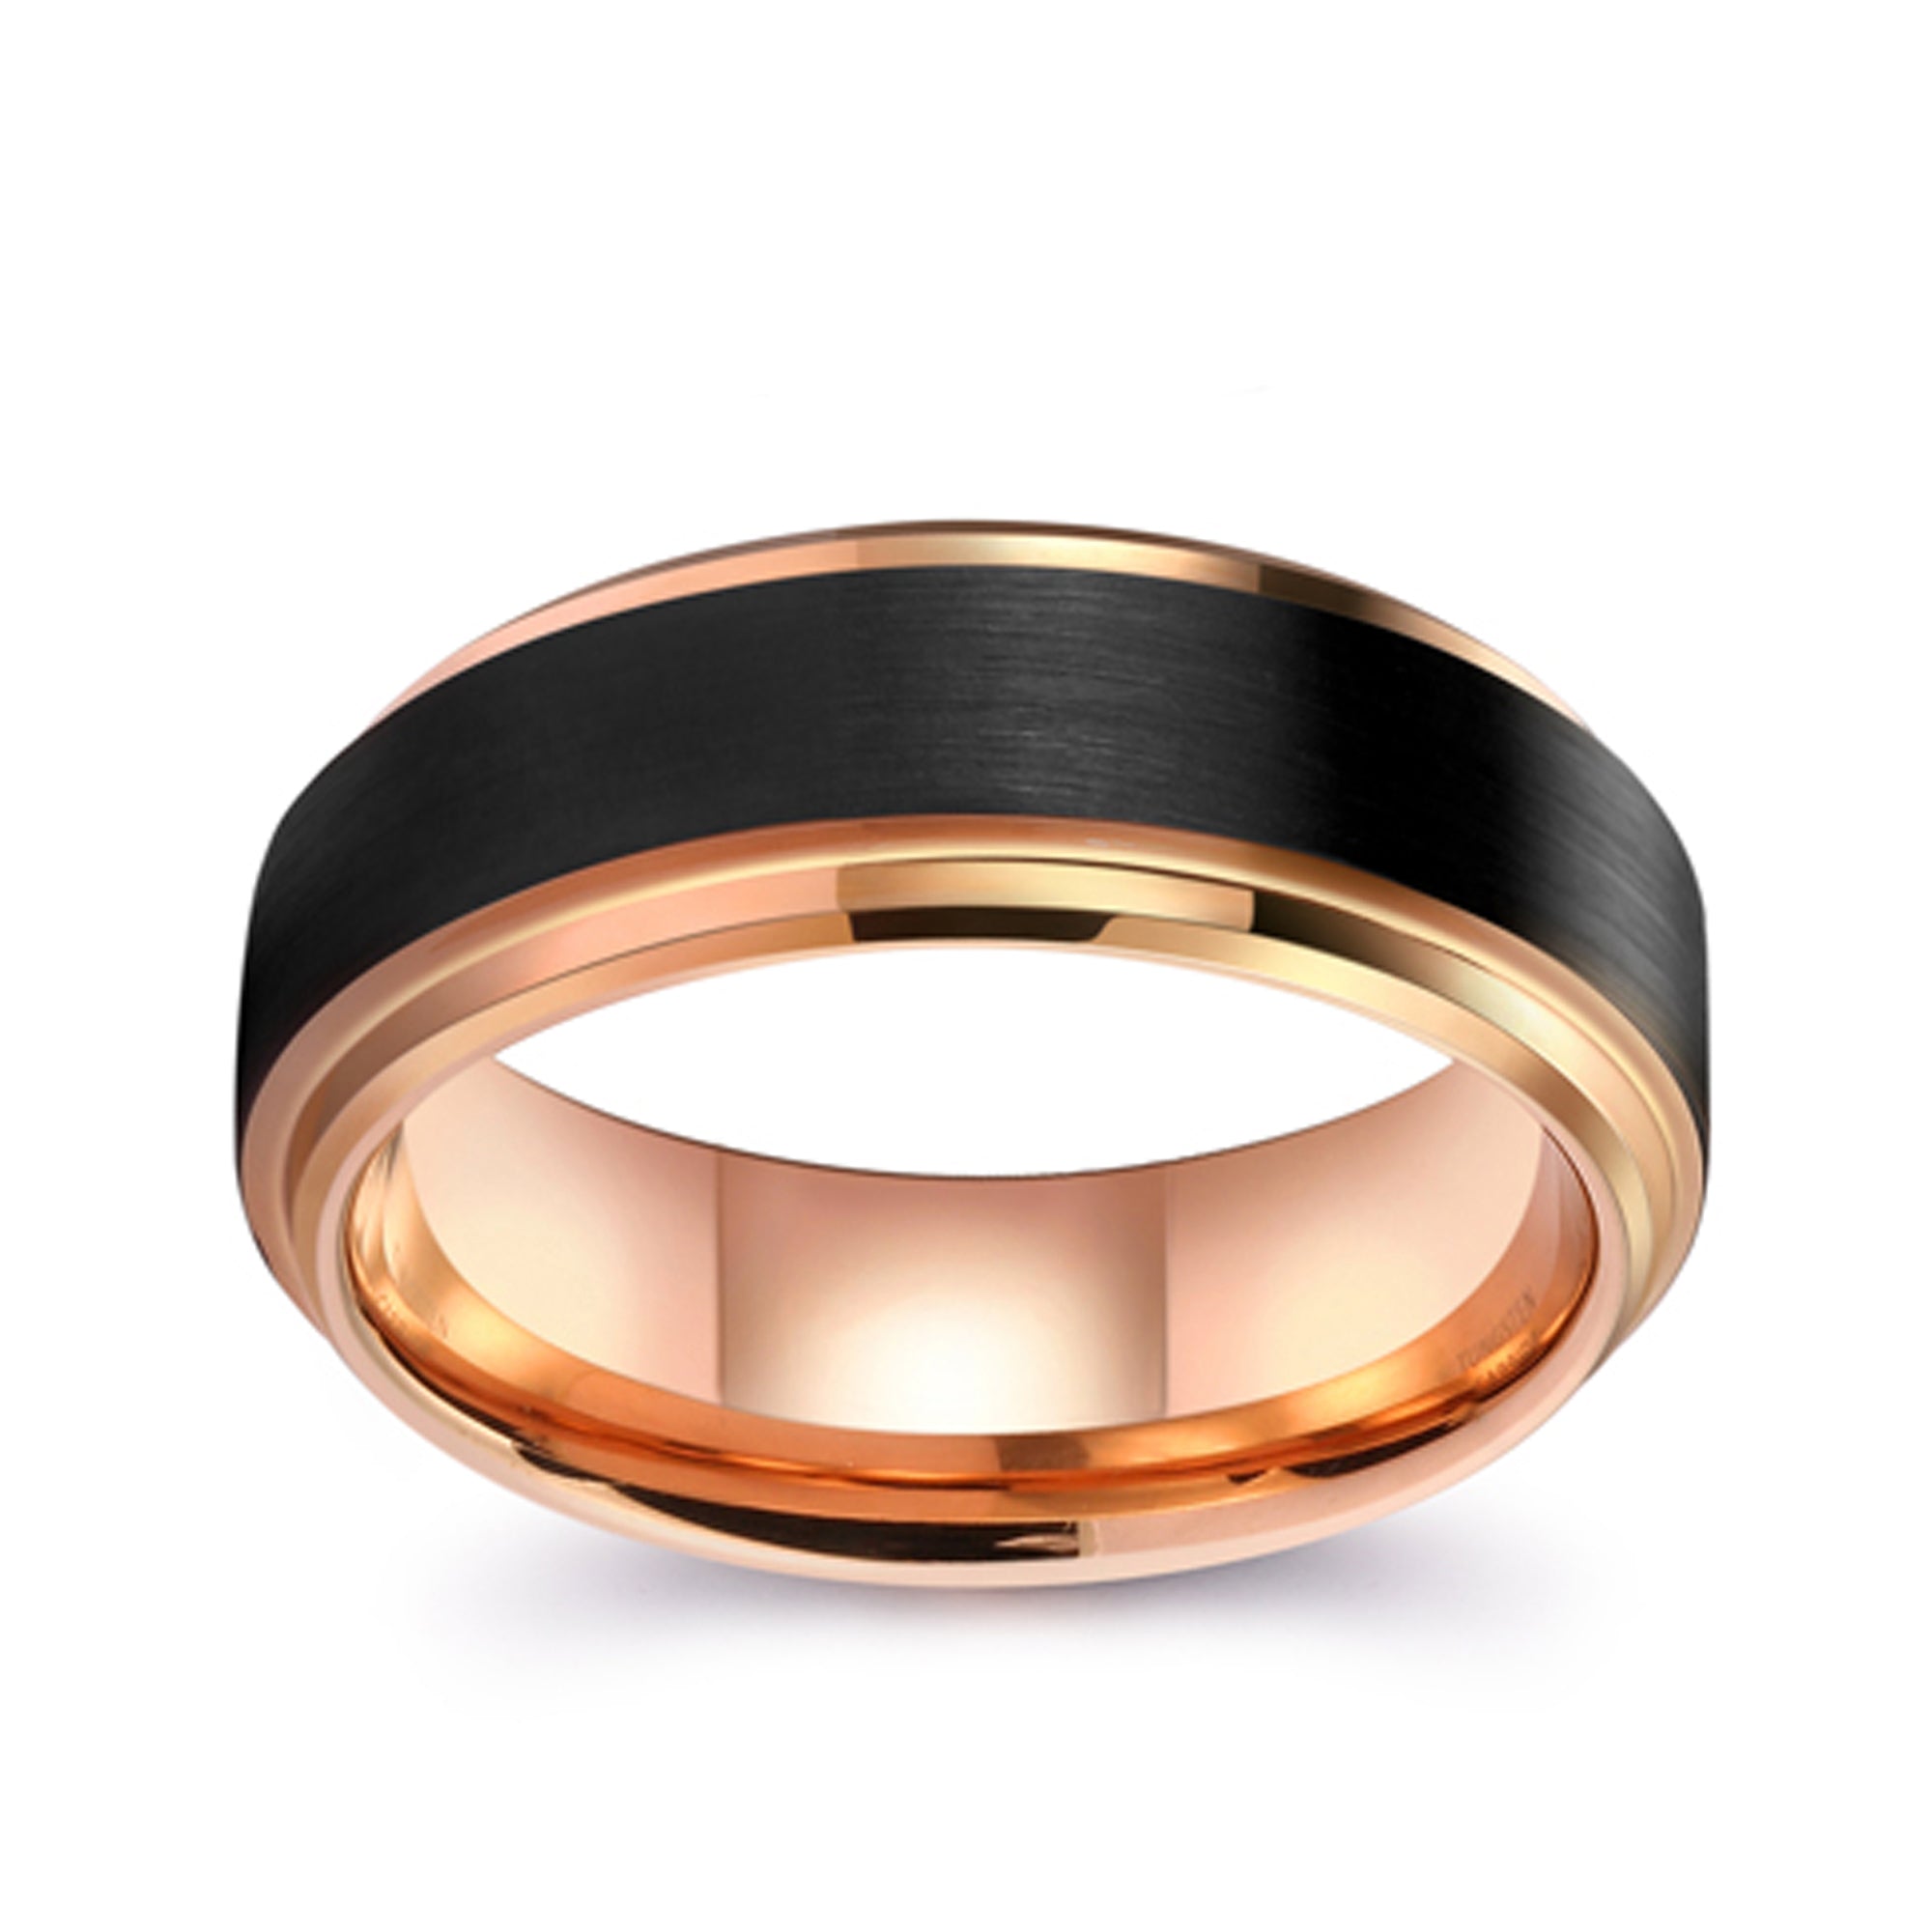 Tungsten Carbide Ring with Stepped Edge in Black and Rose Gold, 8MM